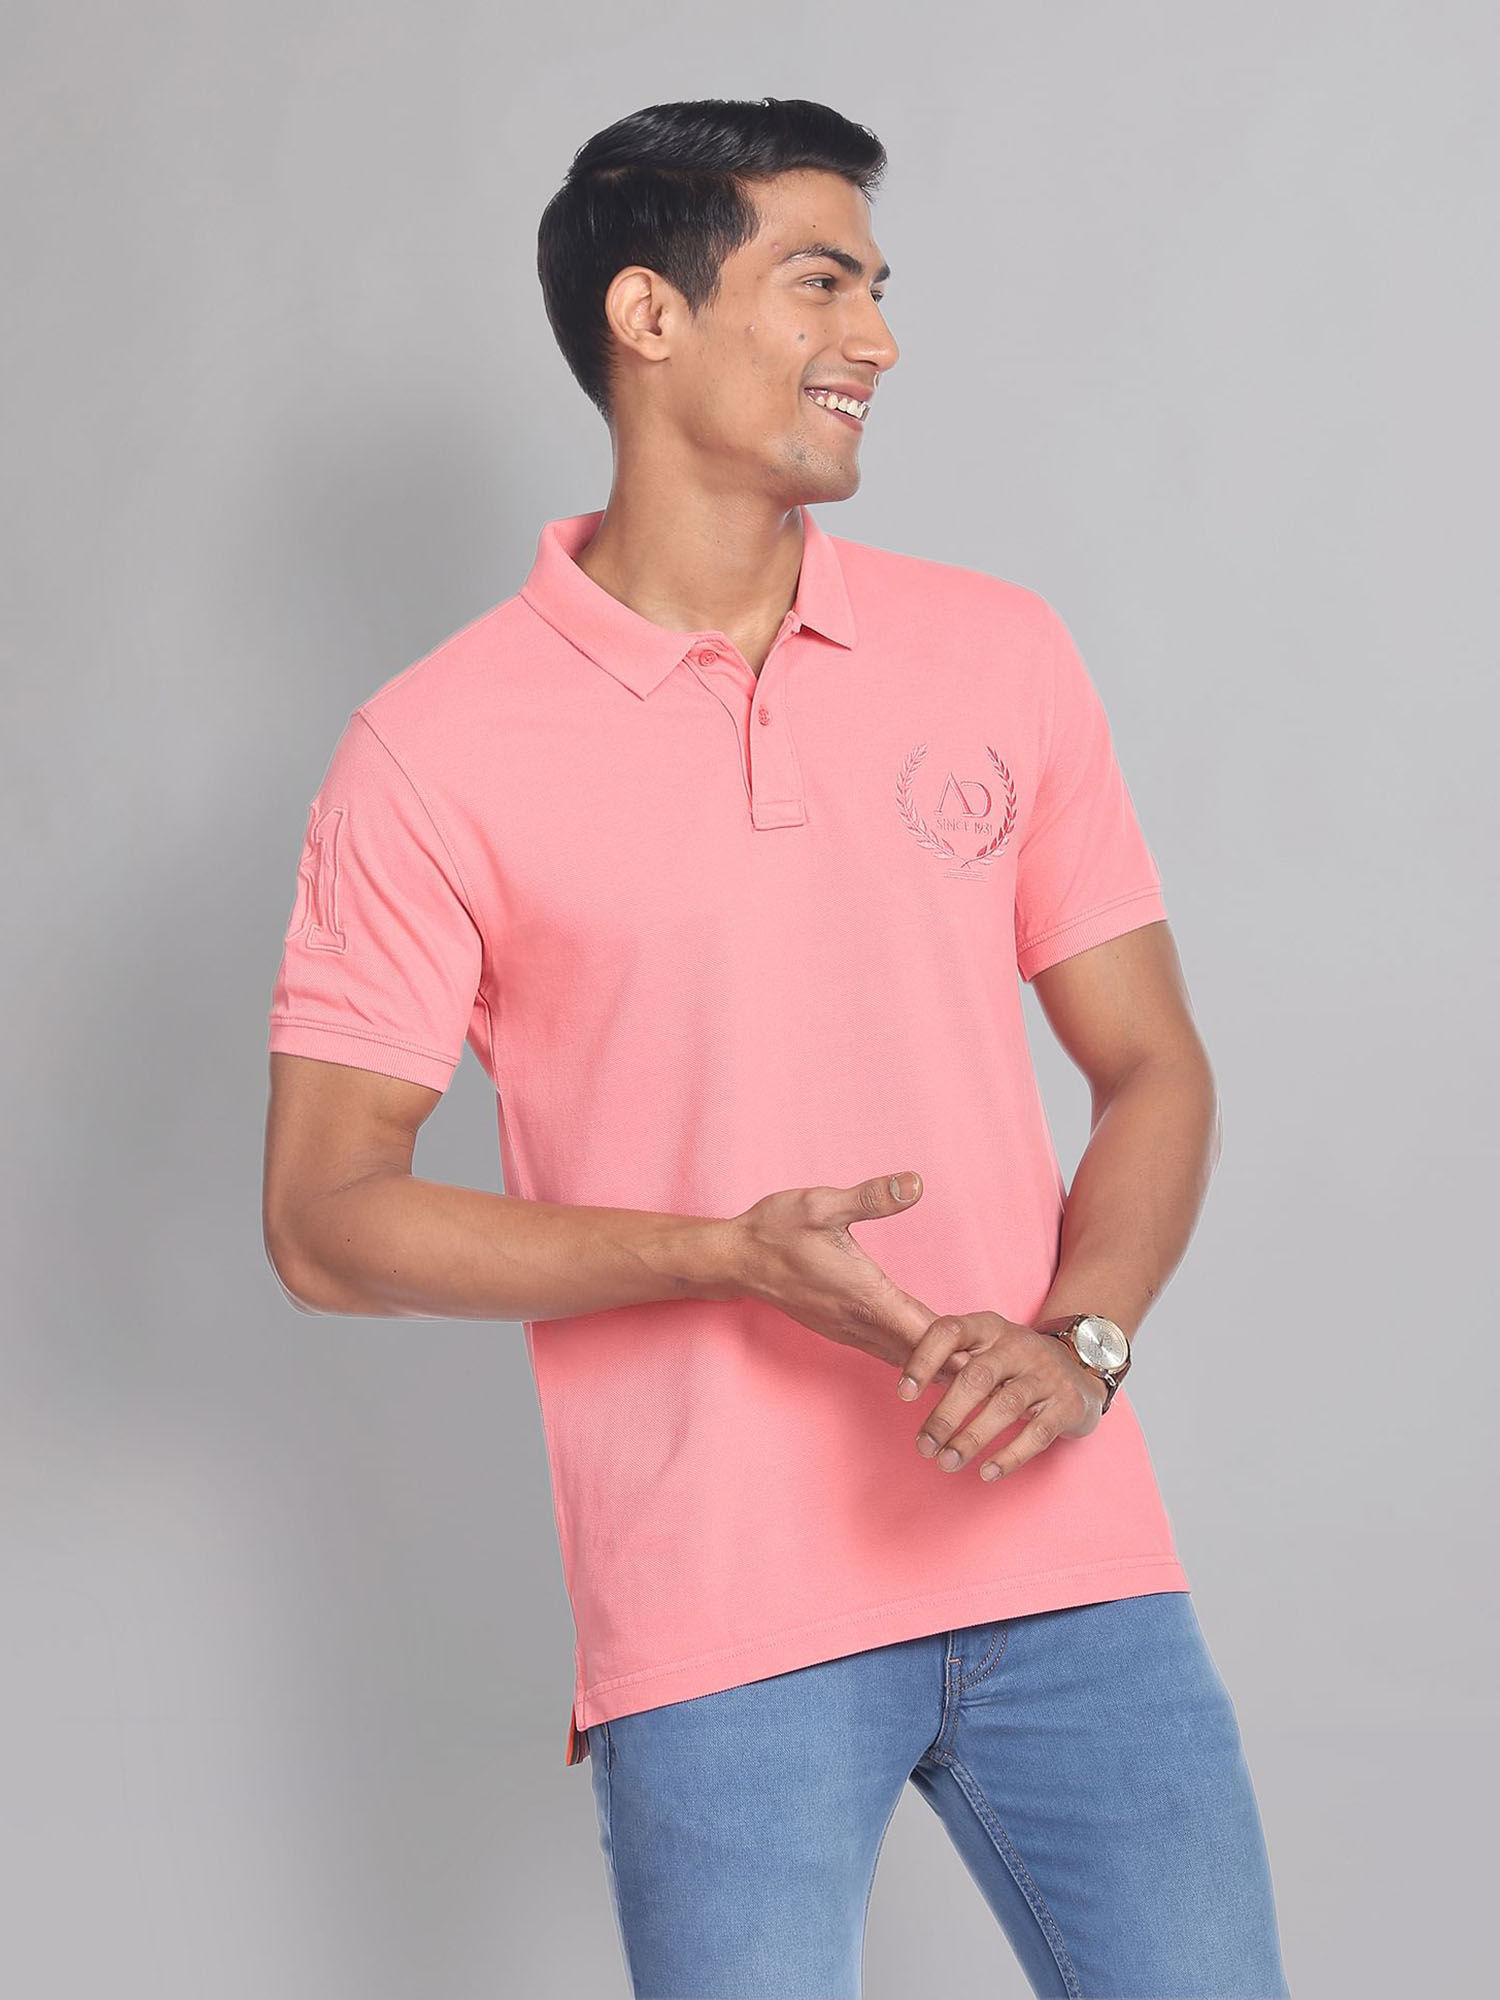 embroidered logo solid polo shirt pink